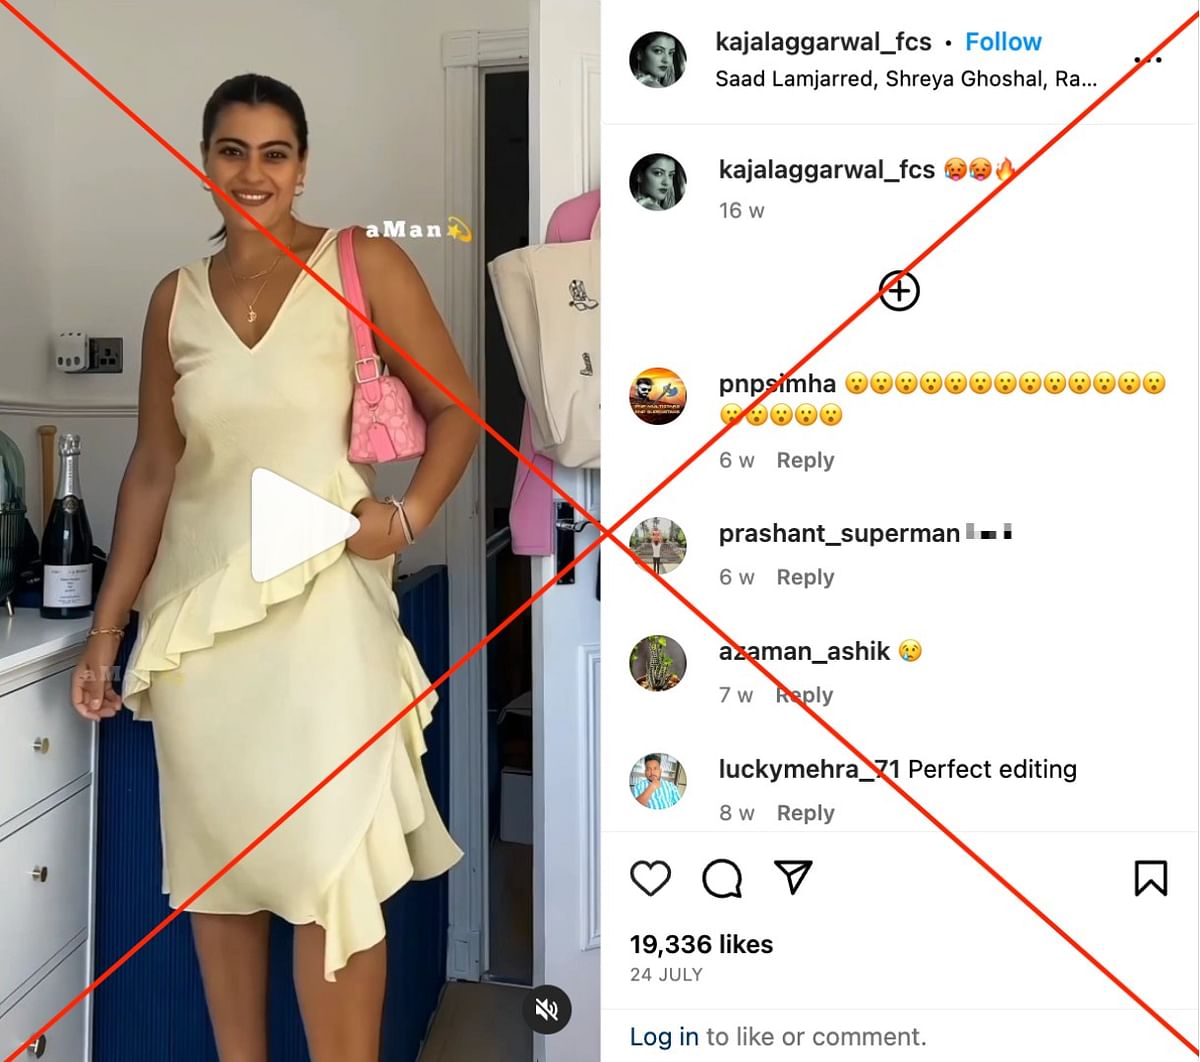 Kajol's face has been superimposed on a video of an English social media influencer.